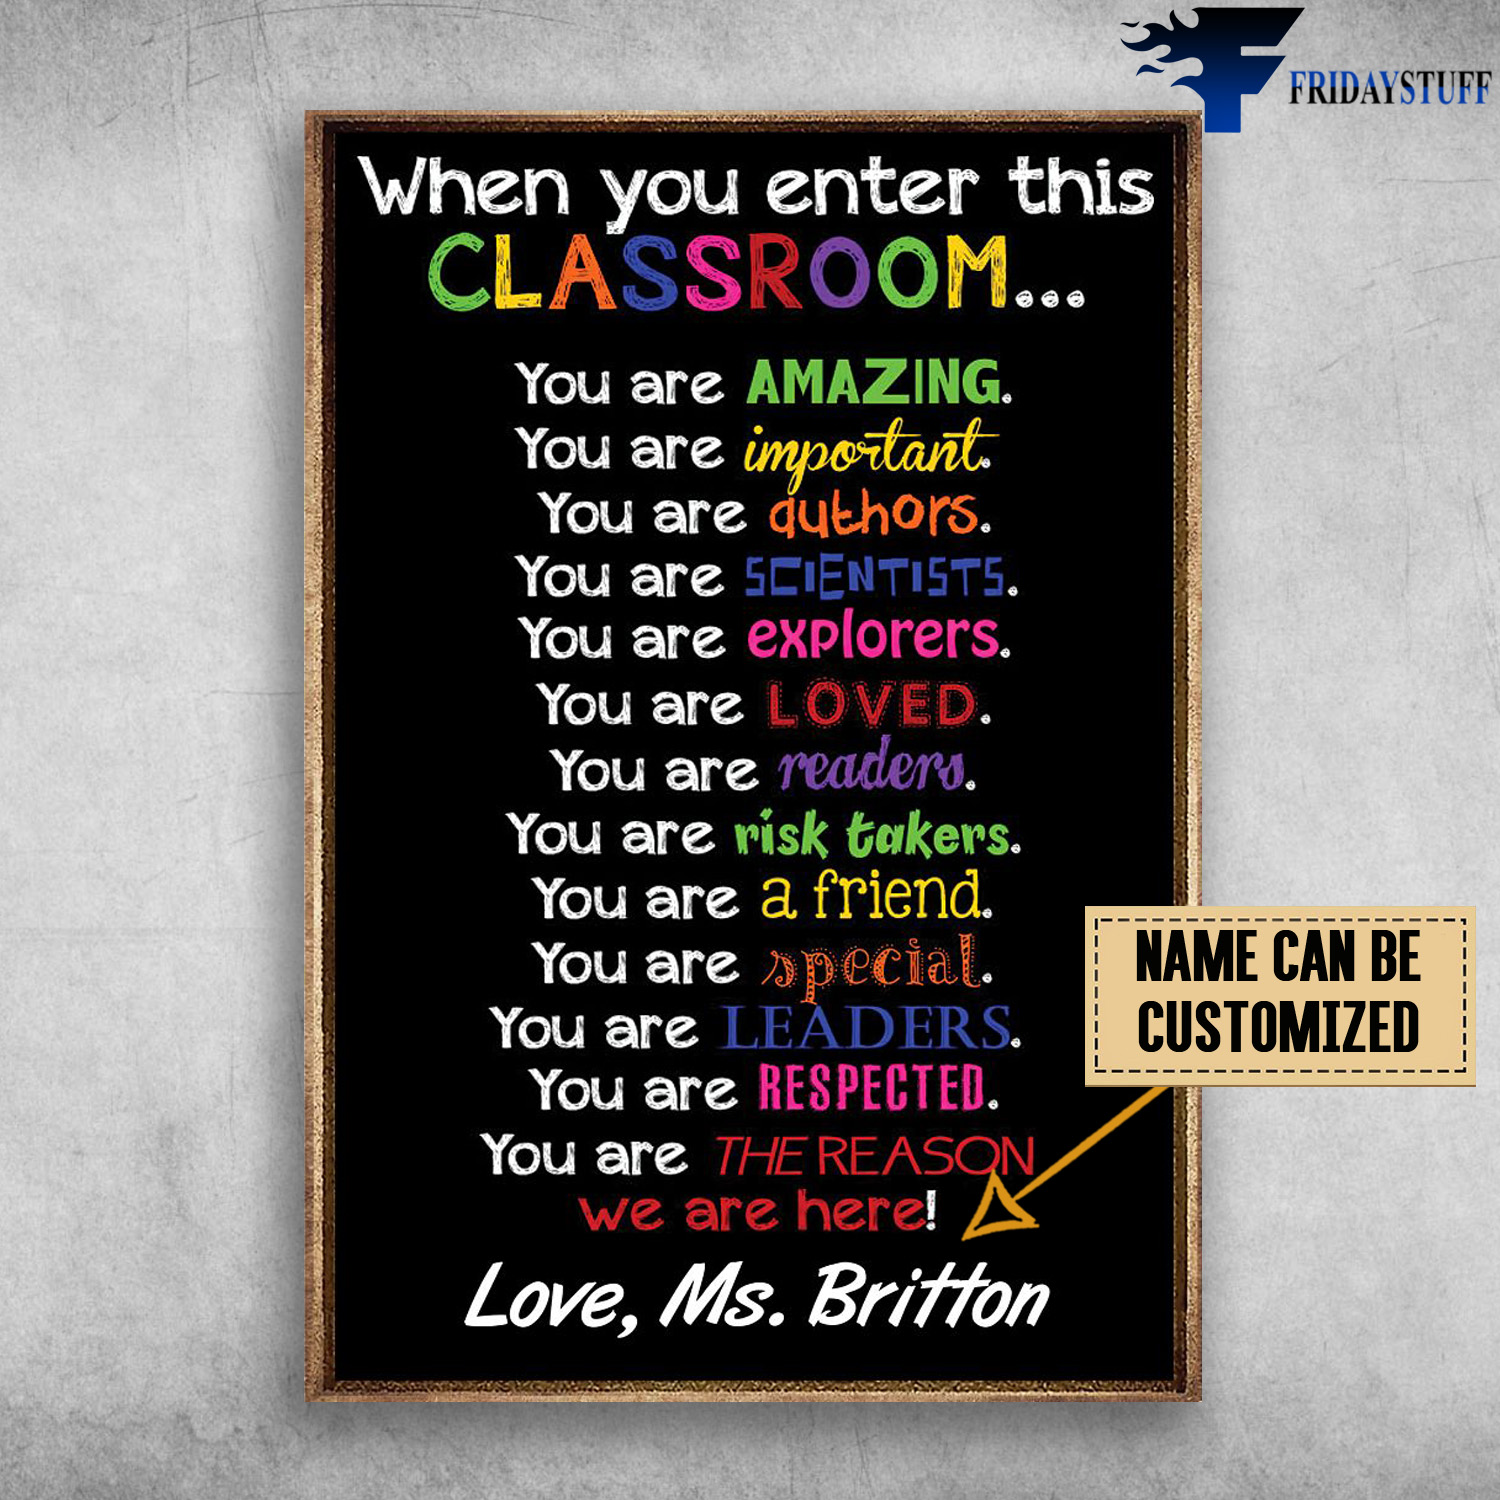 ClassRoom Rule, When You Enter This Classroom, You Are Amazing, You Are Importain, You Are Author, You Are Scientists, You Are Explorers, You Are Loved, You Are Readers, You Are Risk Takers, You Are A Friend, You Are Special